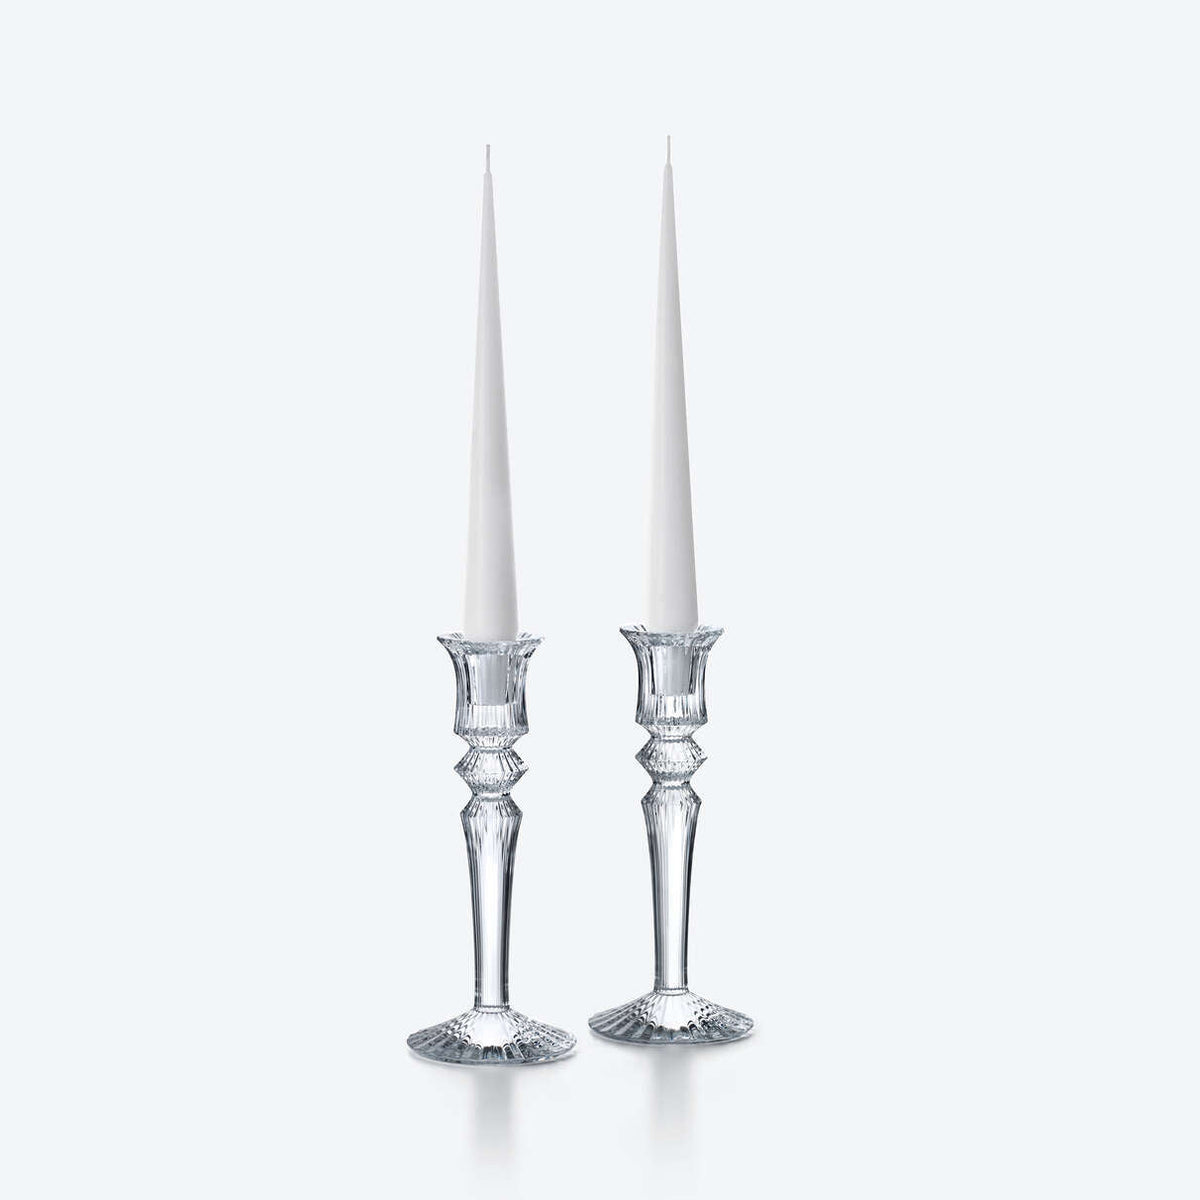 Mille Nuits Candleholders, Set of 2 (Disc)